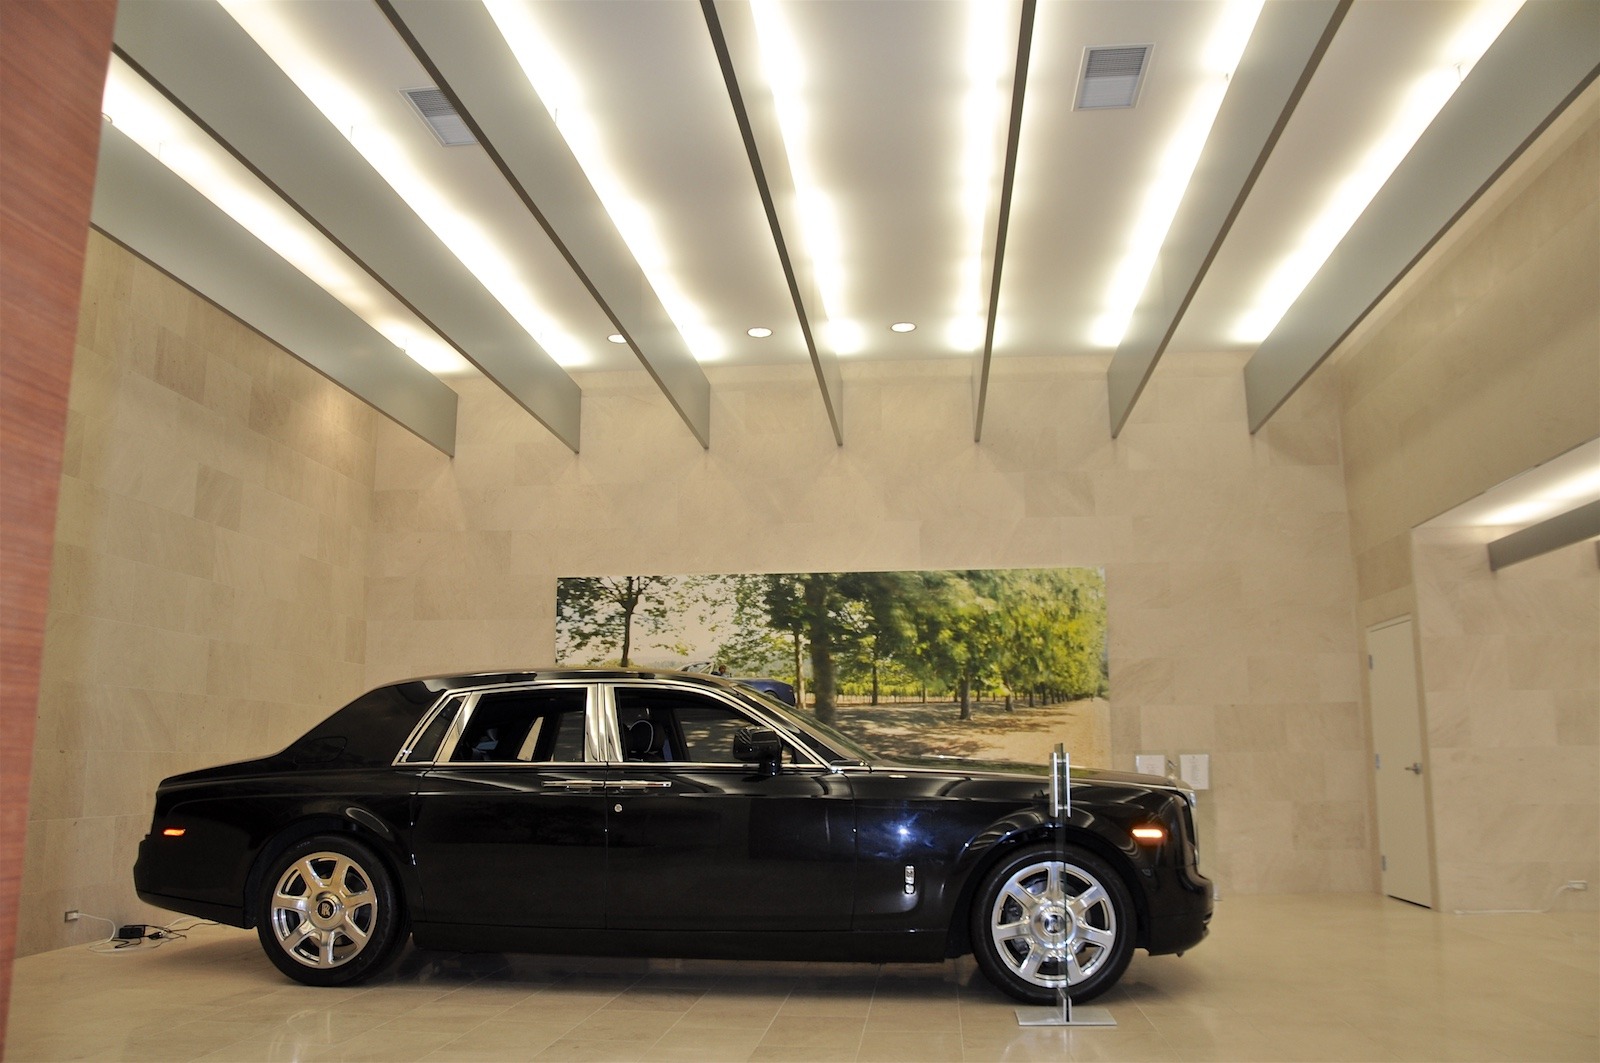 Robertson-Walls-Ceilings-Completed-Projects-Luxury-Car-Dealerships-Rolls-Royce-Vancouver-1 ROLLS-ROYCE, VANCOUVER